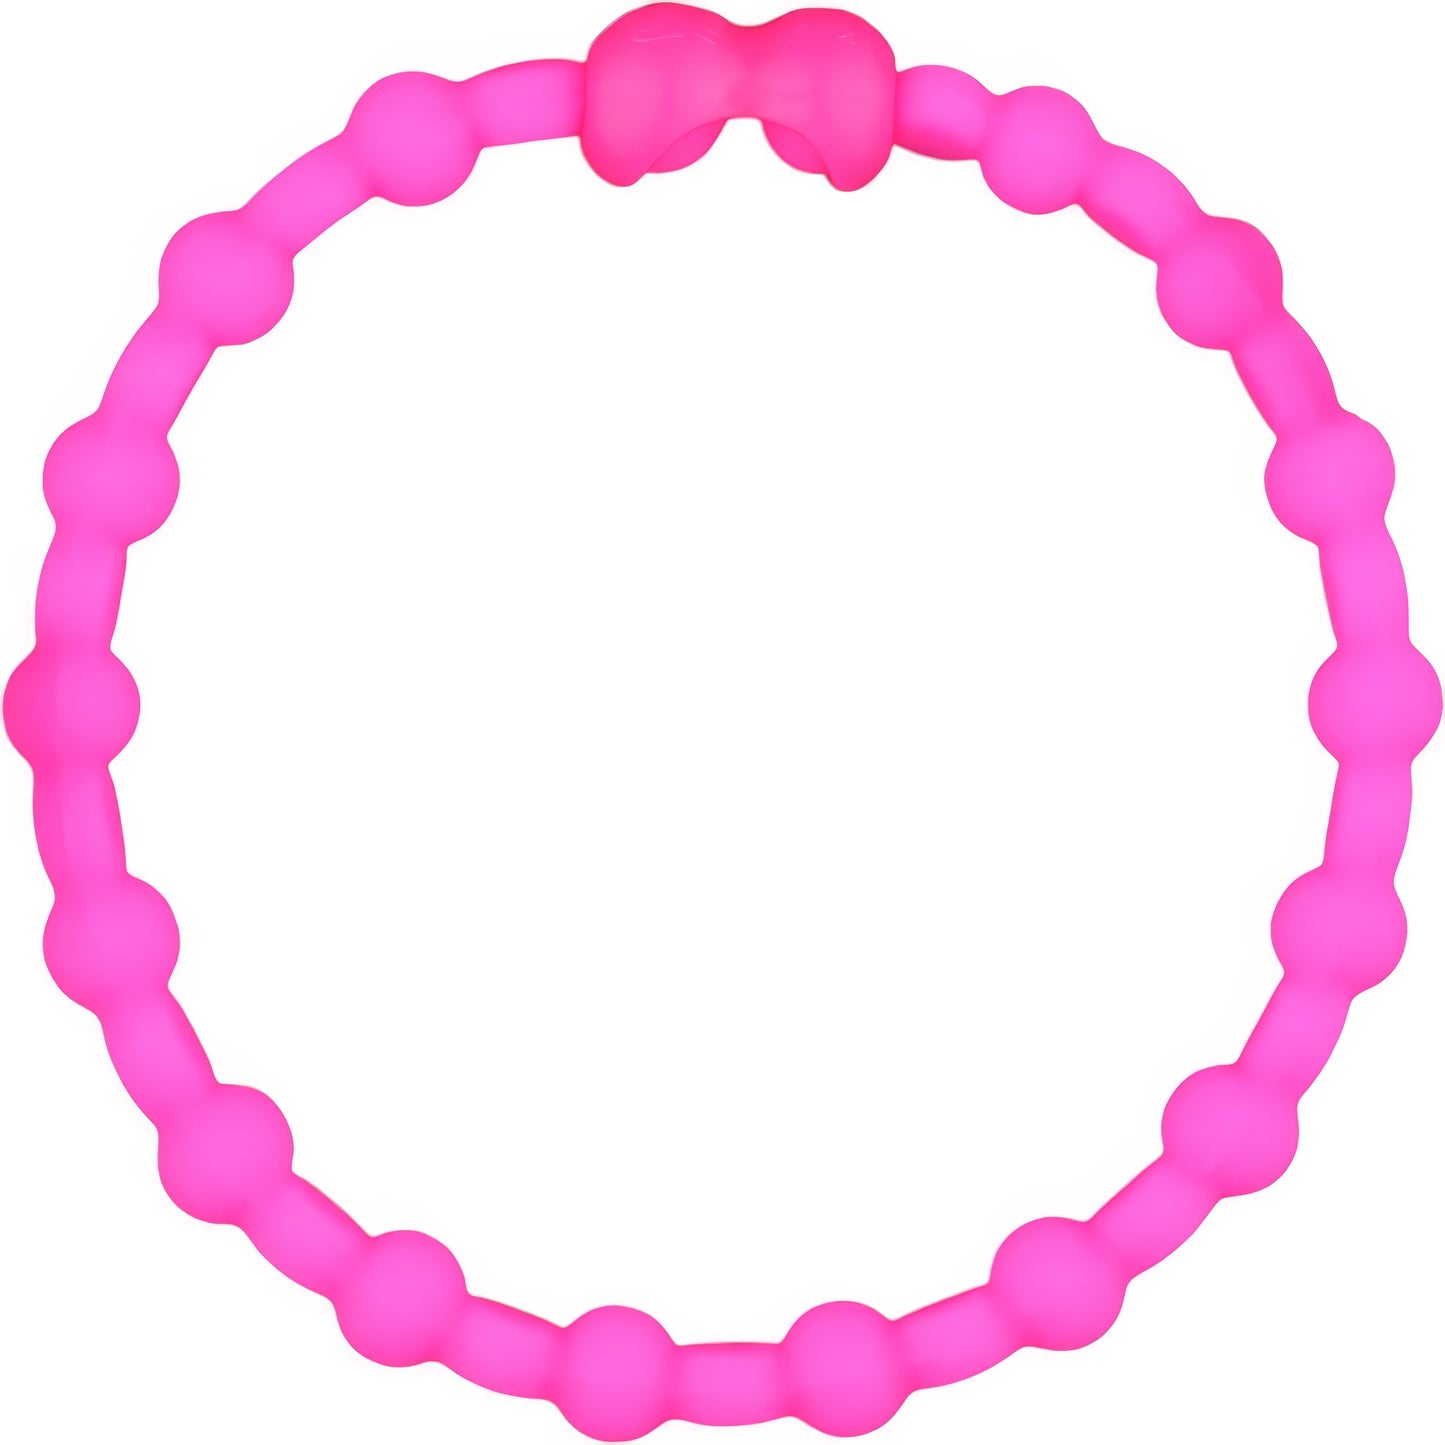 Neon Pink Hair Ties (8 Pack): A Pop of Playful Fun for Every Look